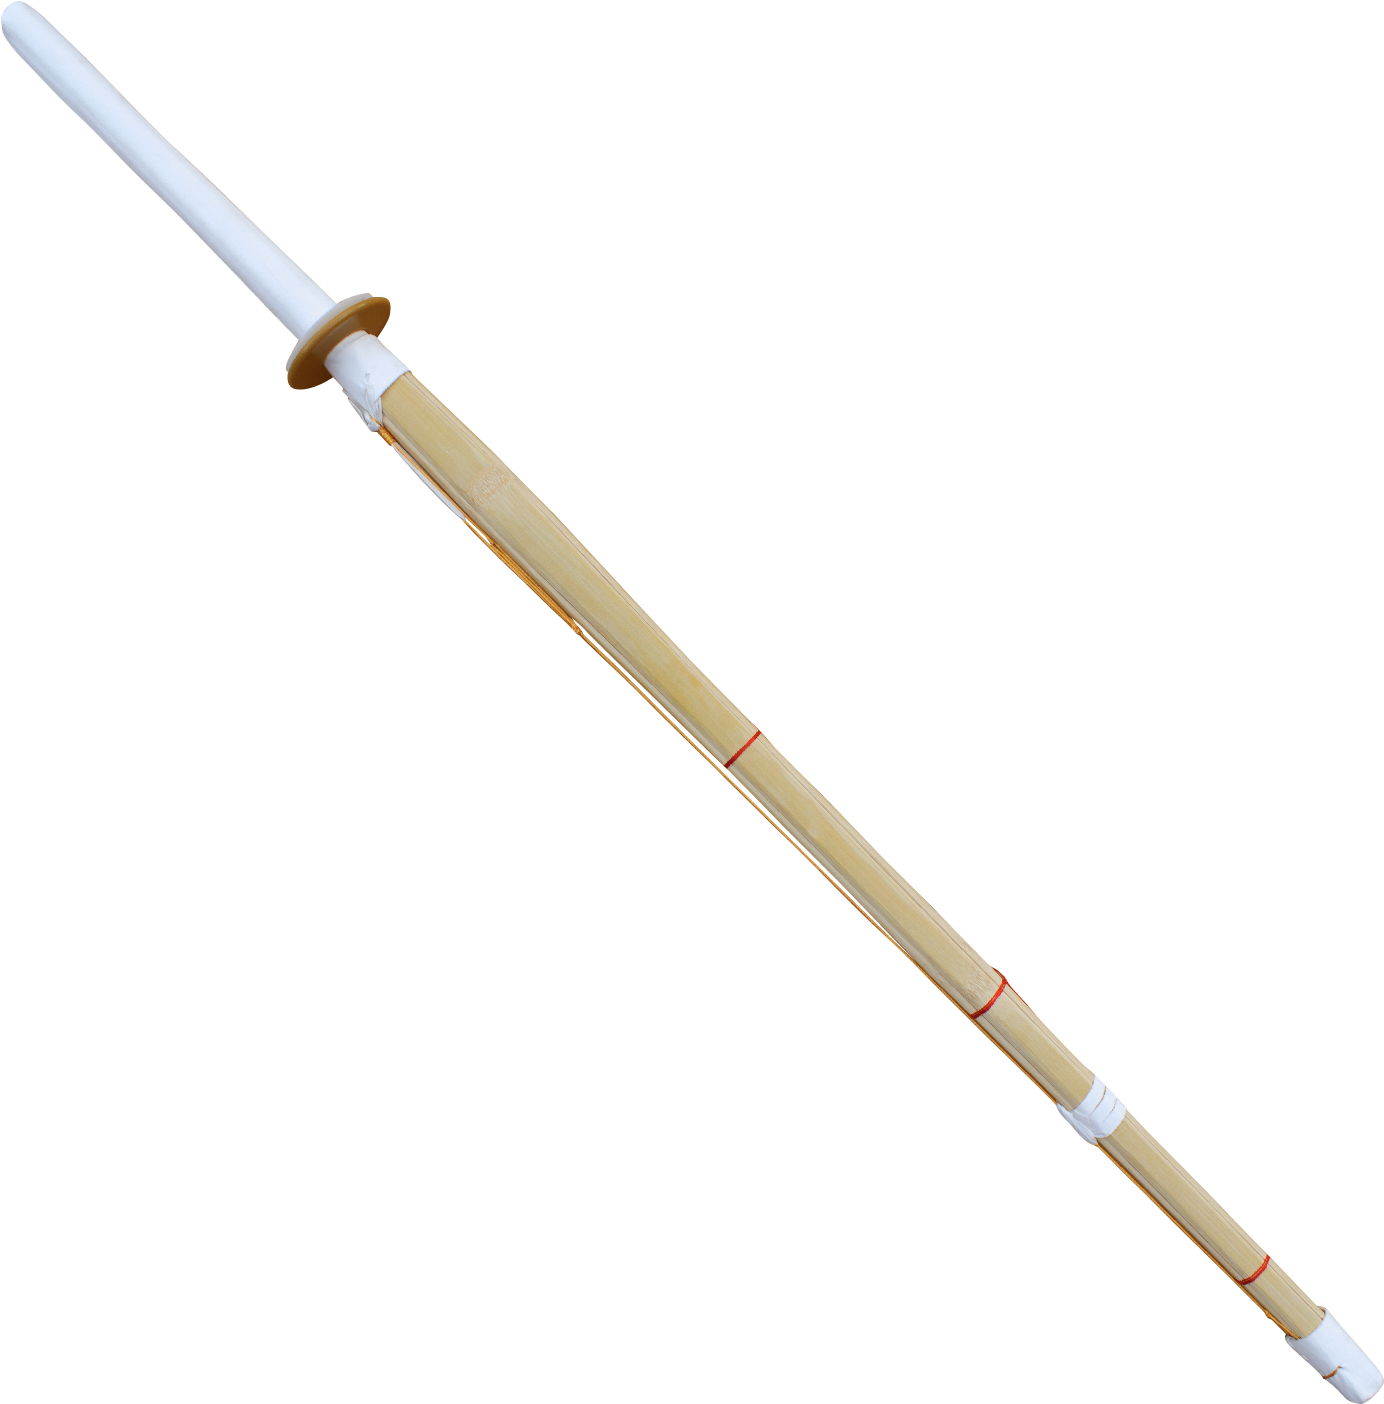 A White And Brown Sword